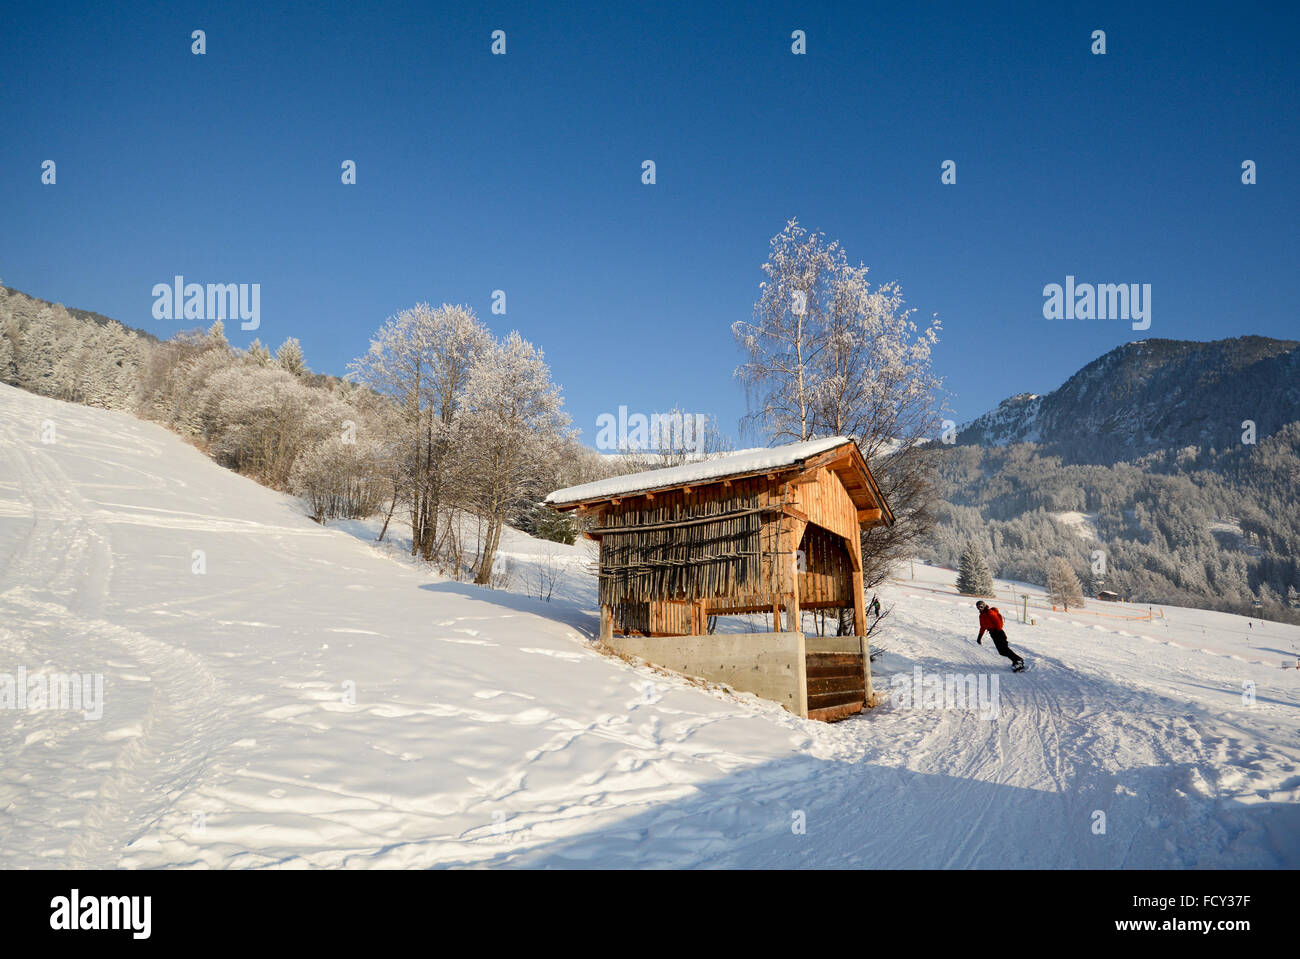 Skiing in a winter landscape with wooden barn, Pitztal Alps - Tyrol Austria Europe Stock Photo